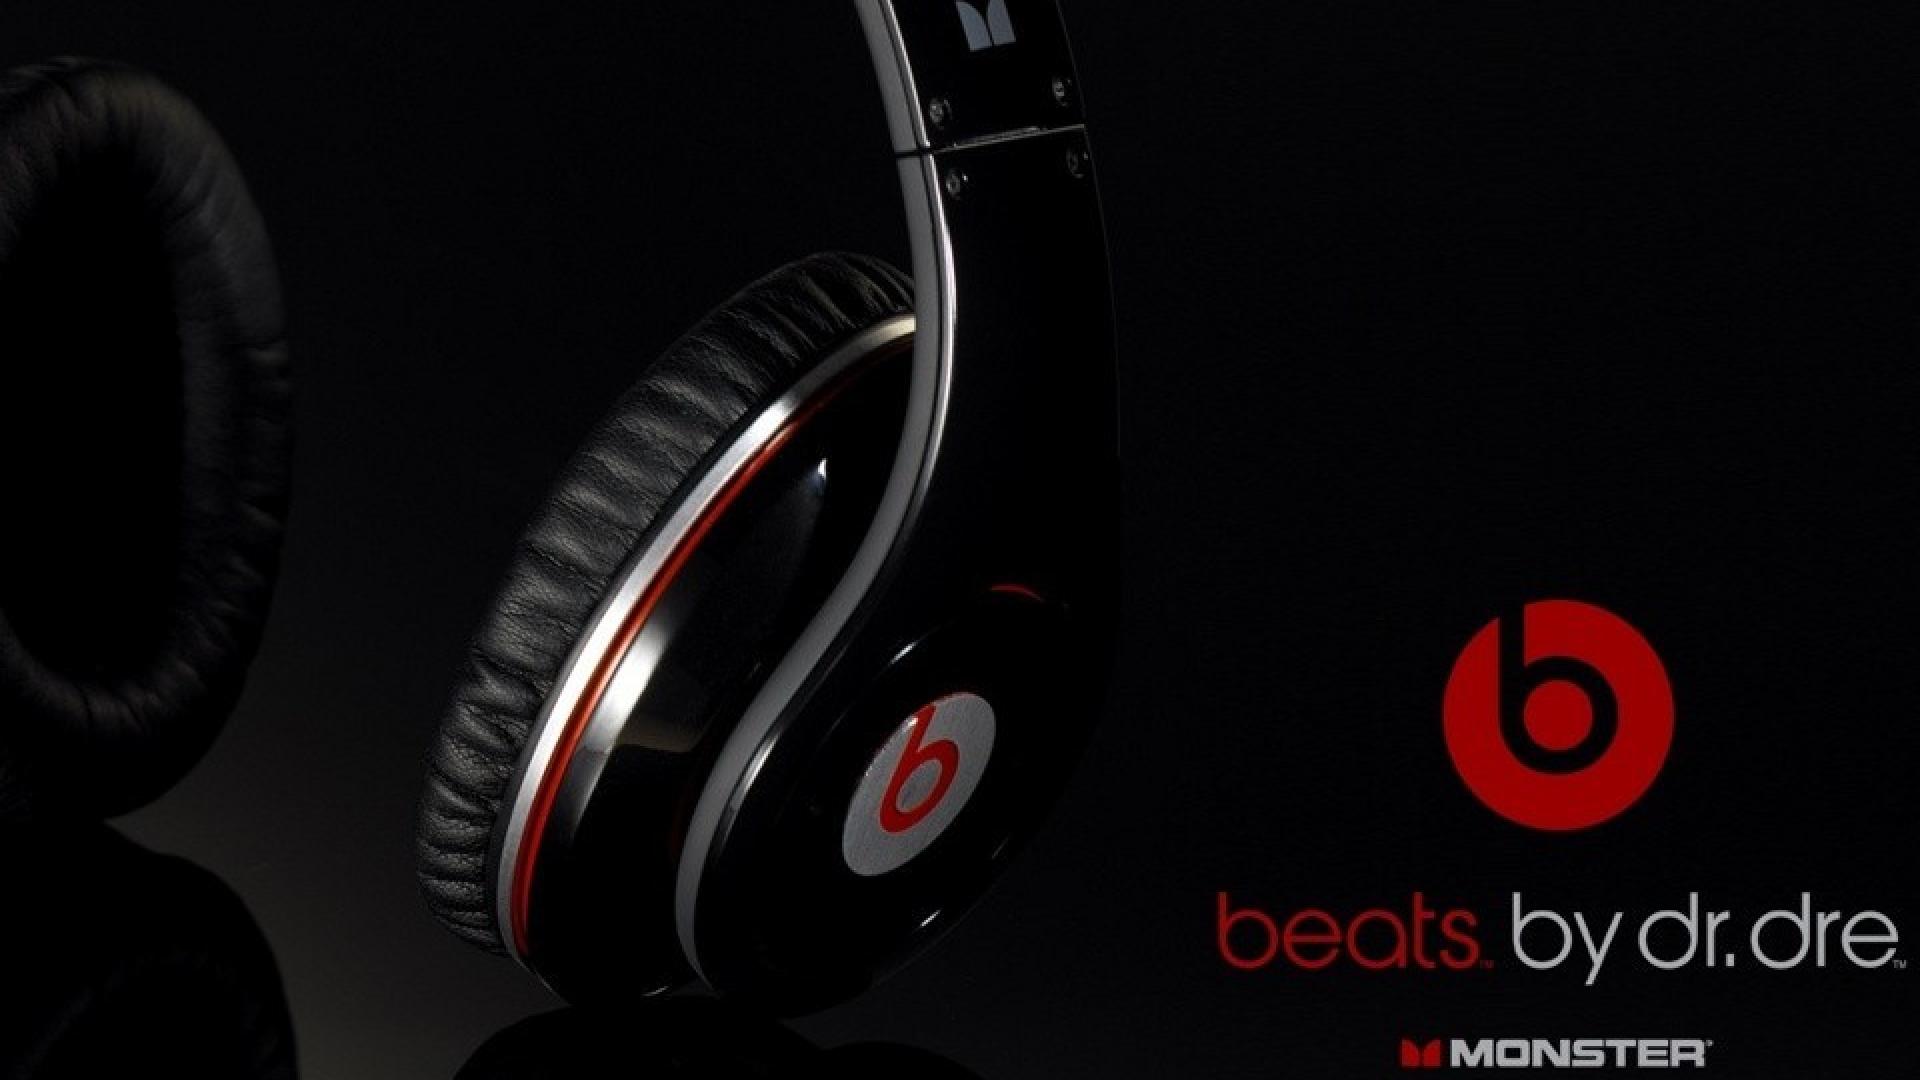 Beats by drdre wallpaper